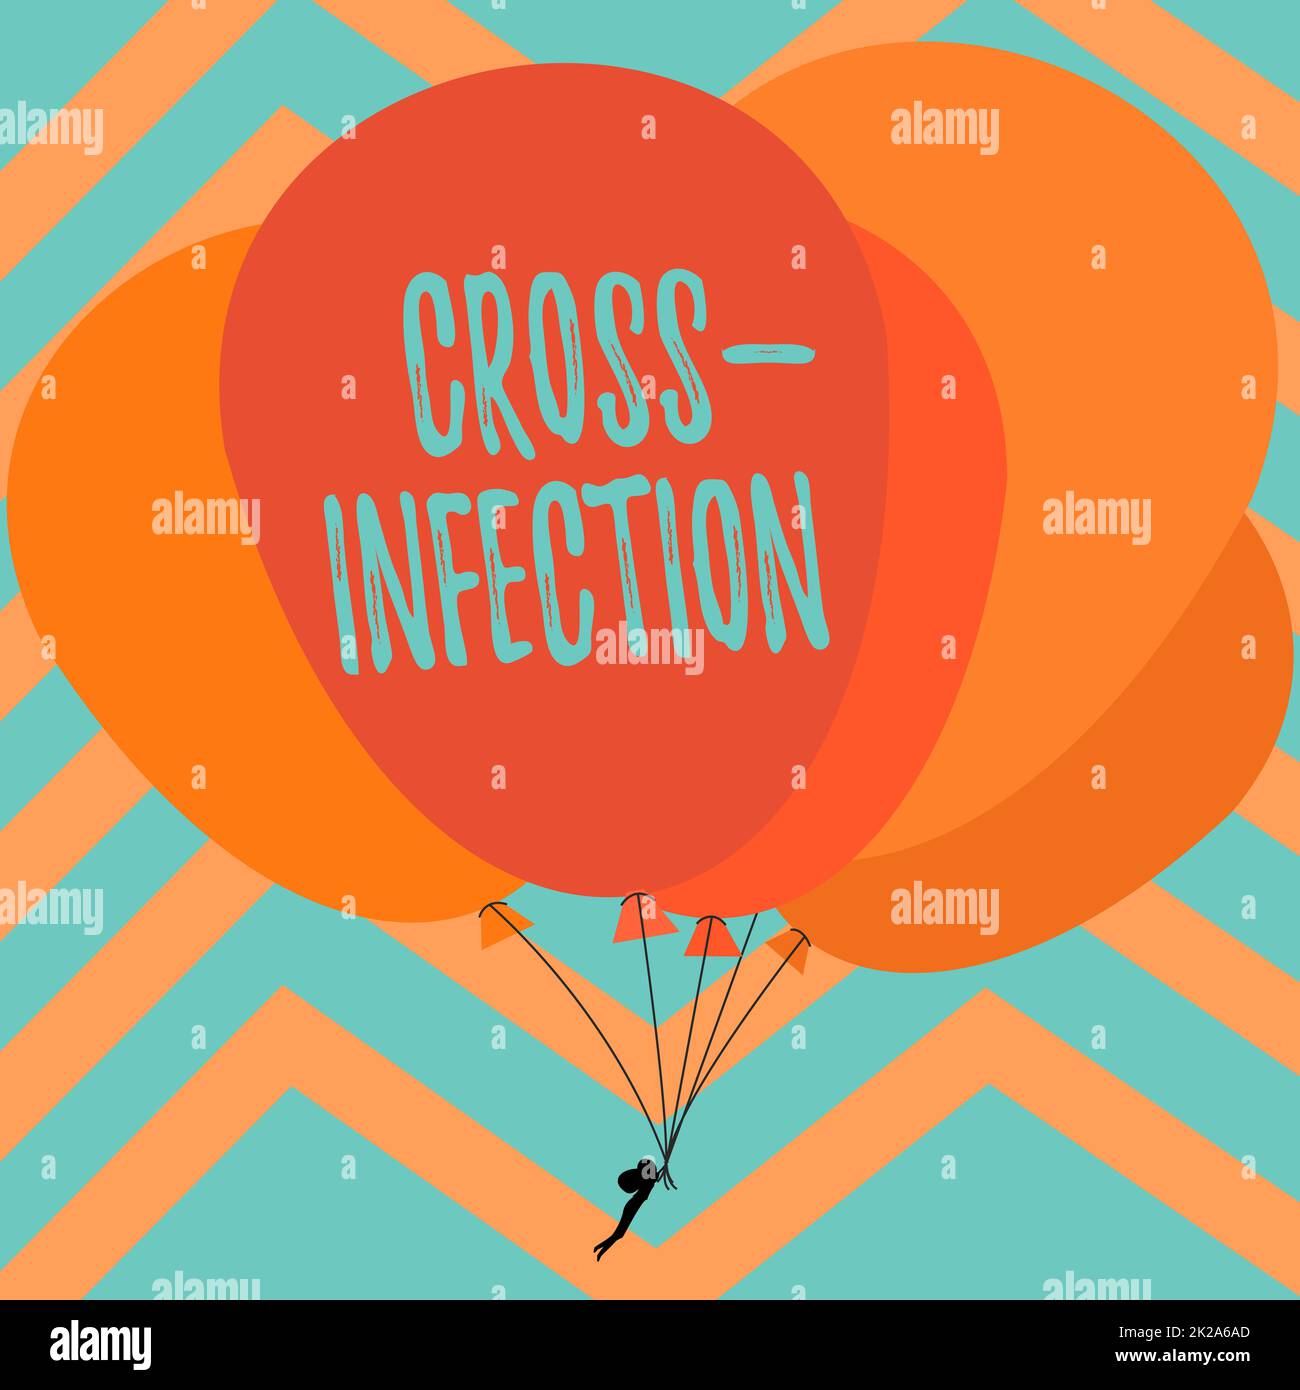 Inspiration showing sign Cross Infection. Internet Concept diseasecausing microorganism transmitted between different species Man Holding Colorful Balloons Drawing Flying Around Striped Background. Stock Photo